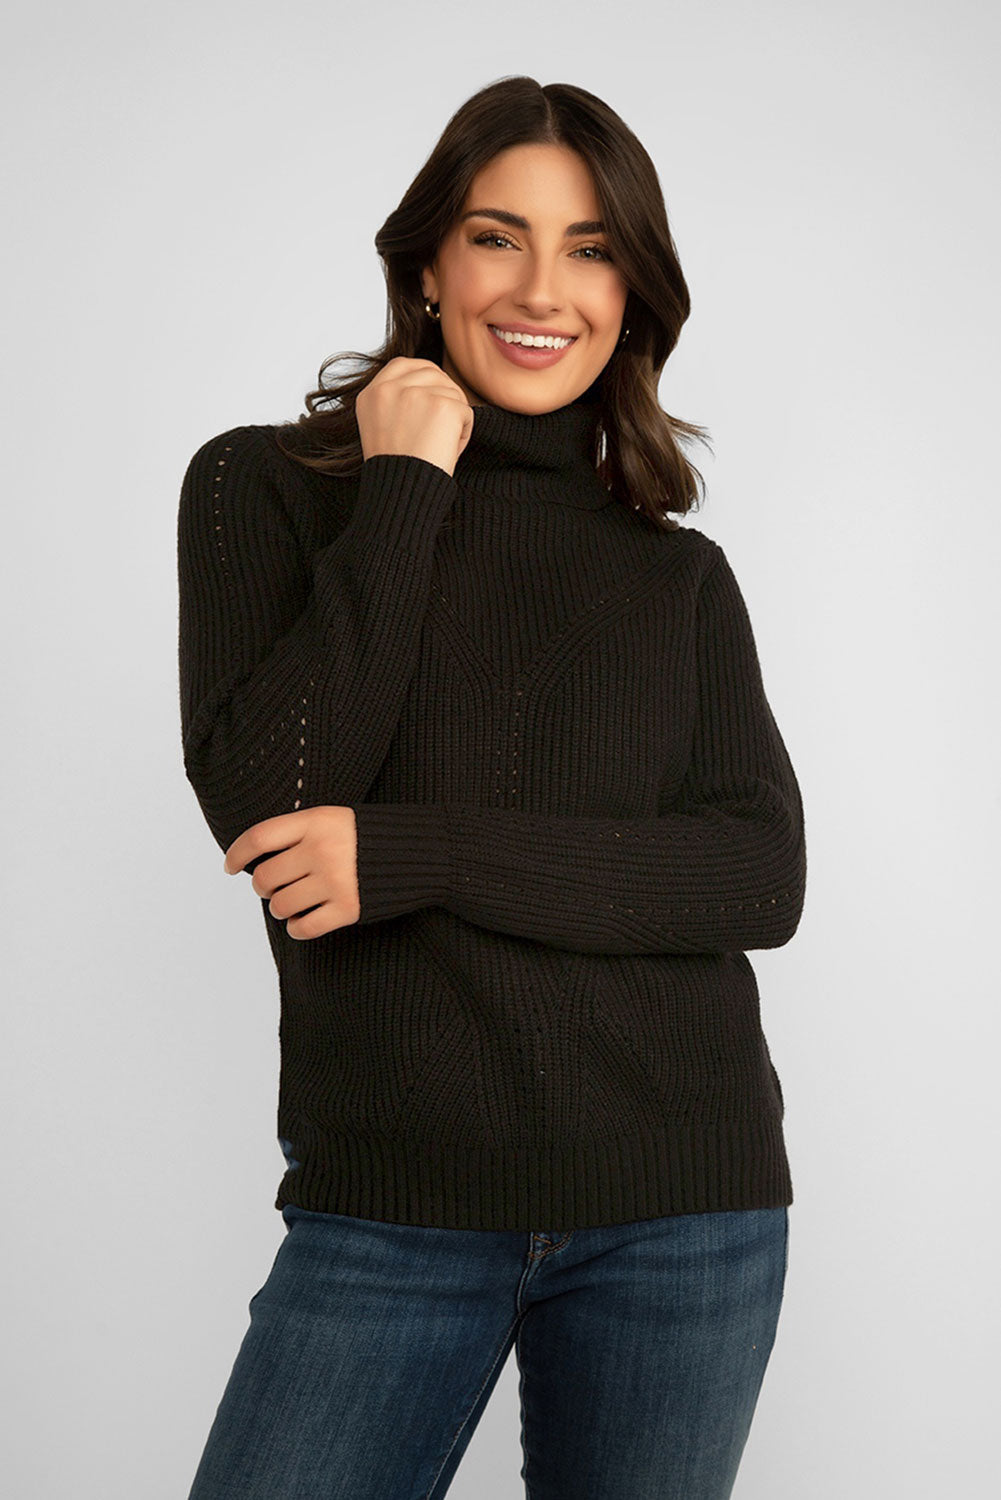 Women's Clothing ALISON SHERI (A42048) Ribbed Turtle Neck Sweater in BLACK